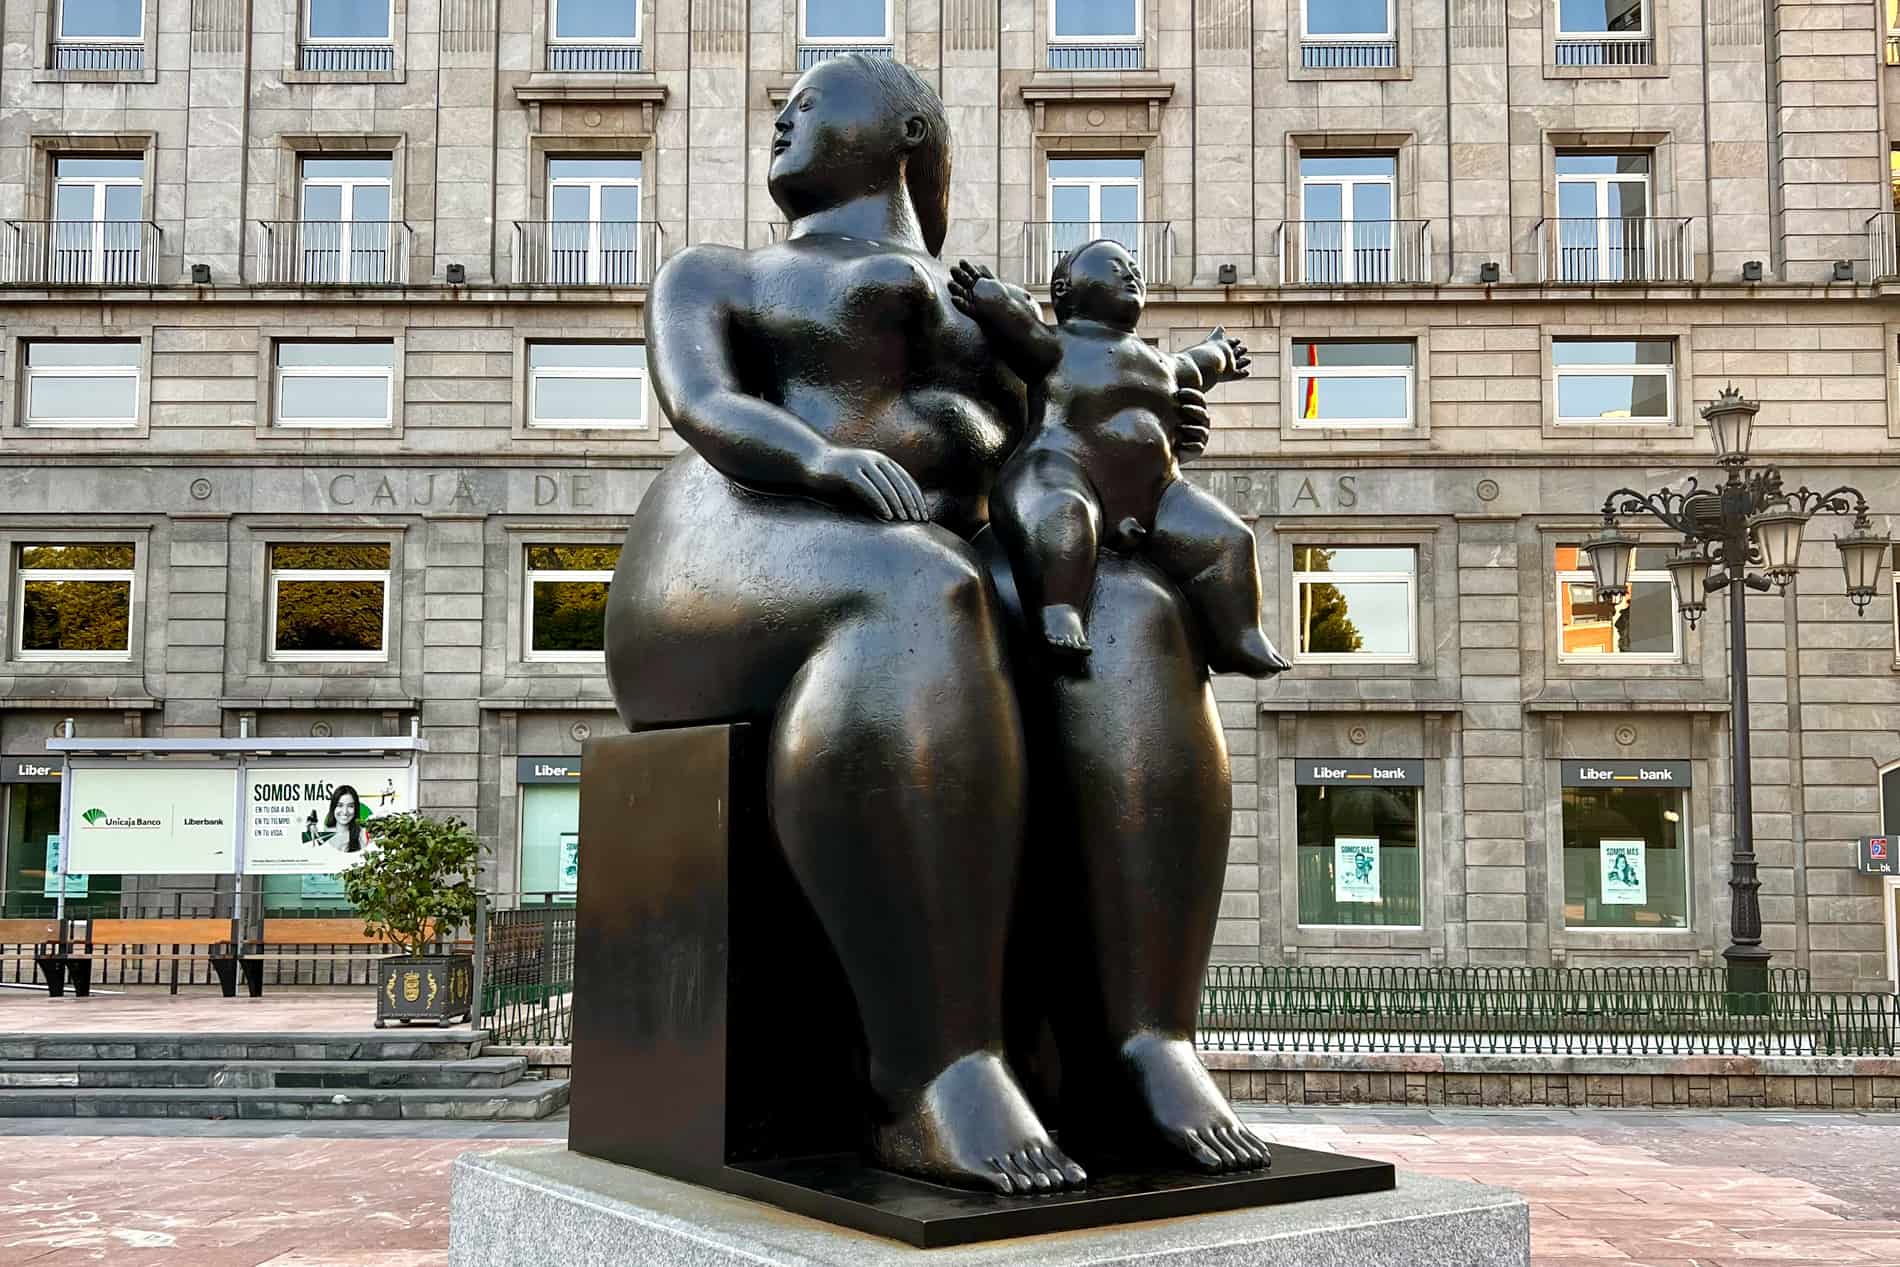 The 'La Maternidad' statue in Oviedo of an oversized and disproportionate mother and his child.